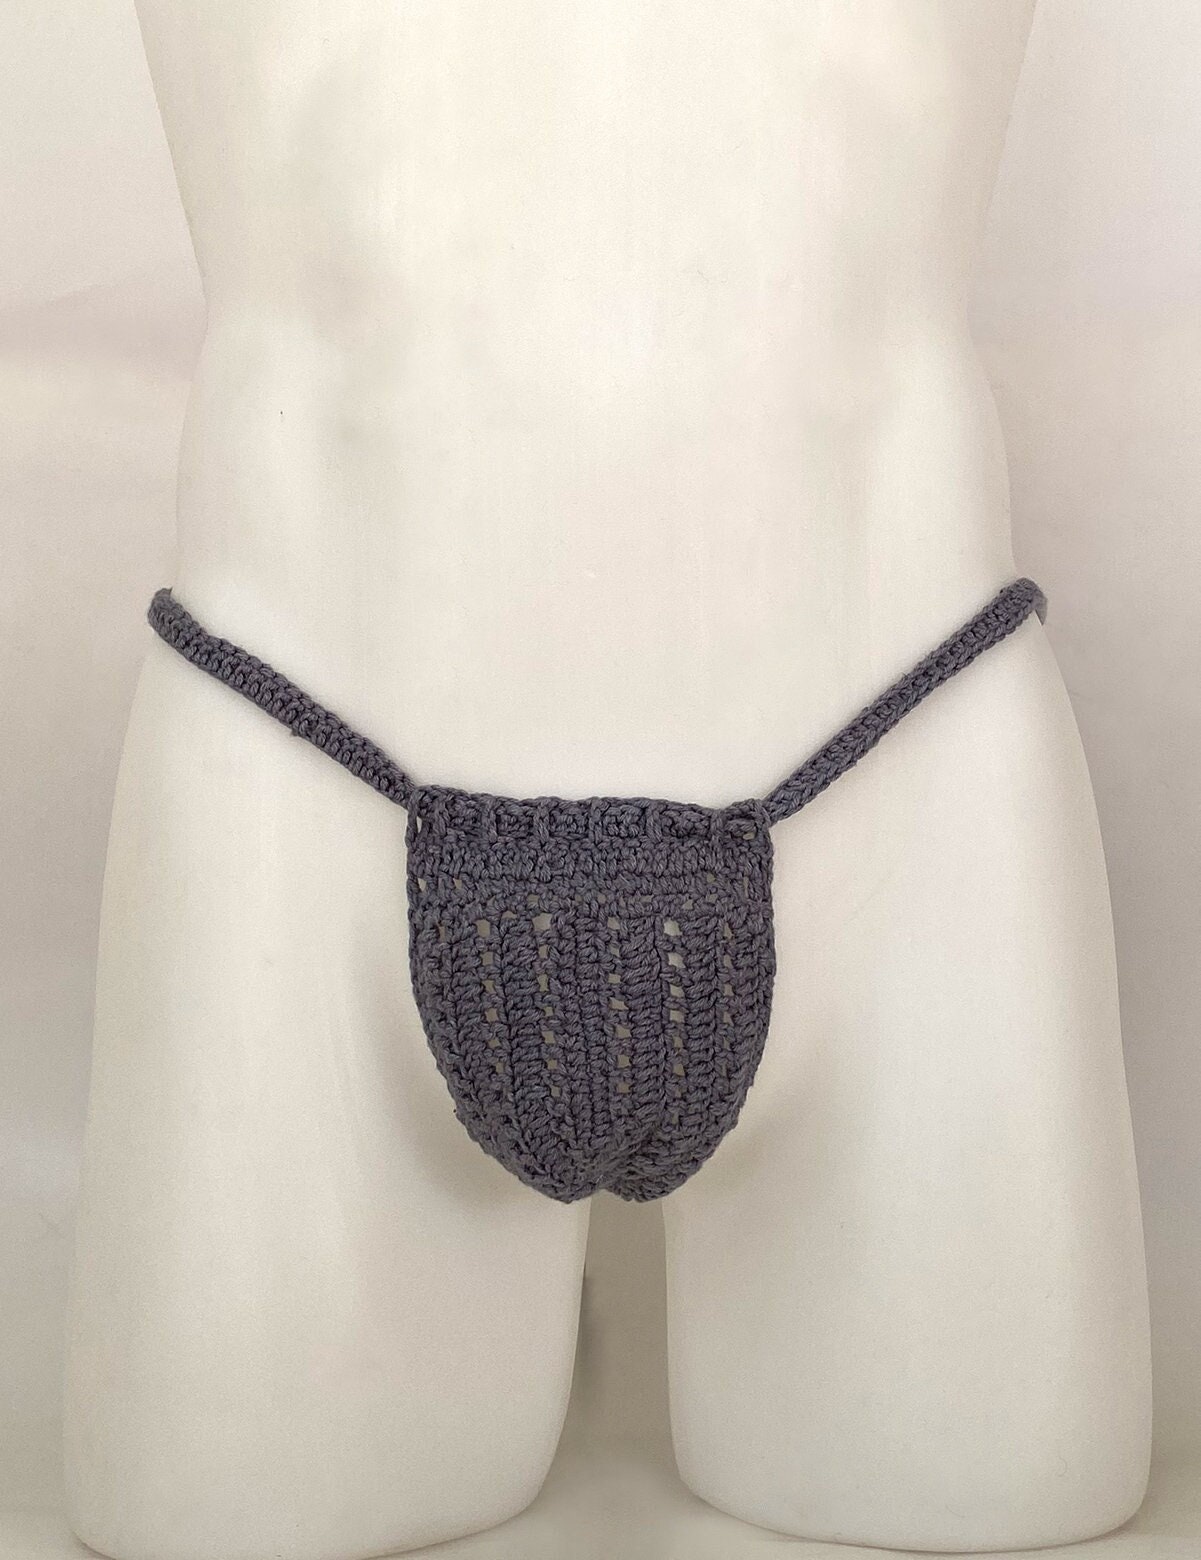 Cheeky Underwear For Women Floral Lace Crochet Thongs Panties Back